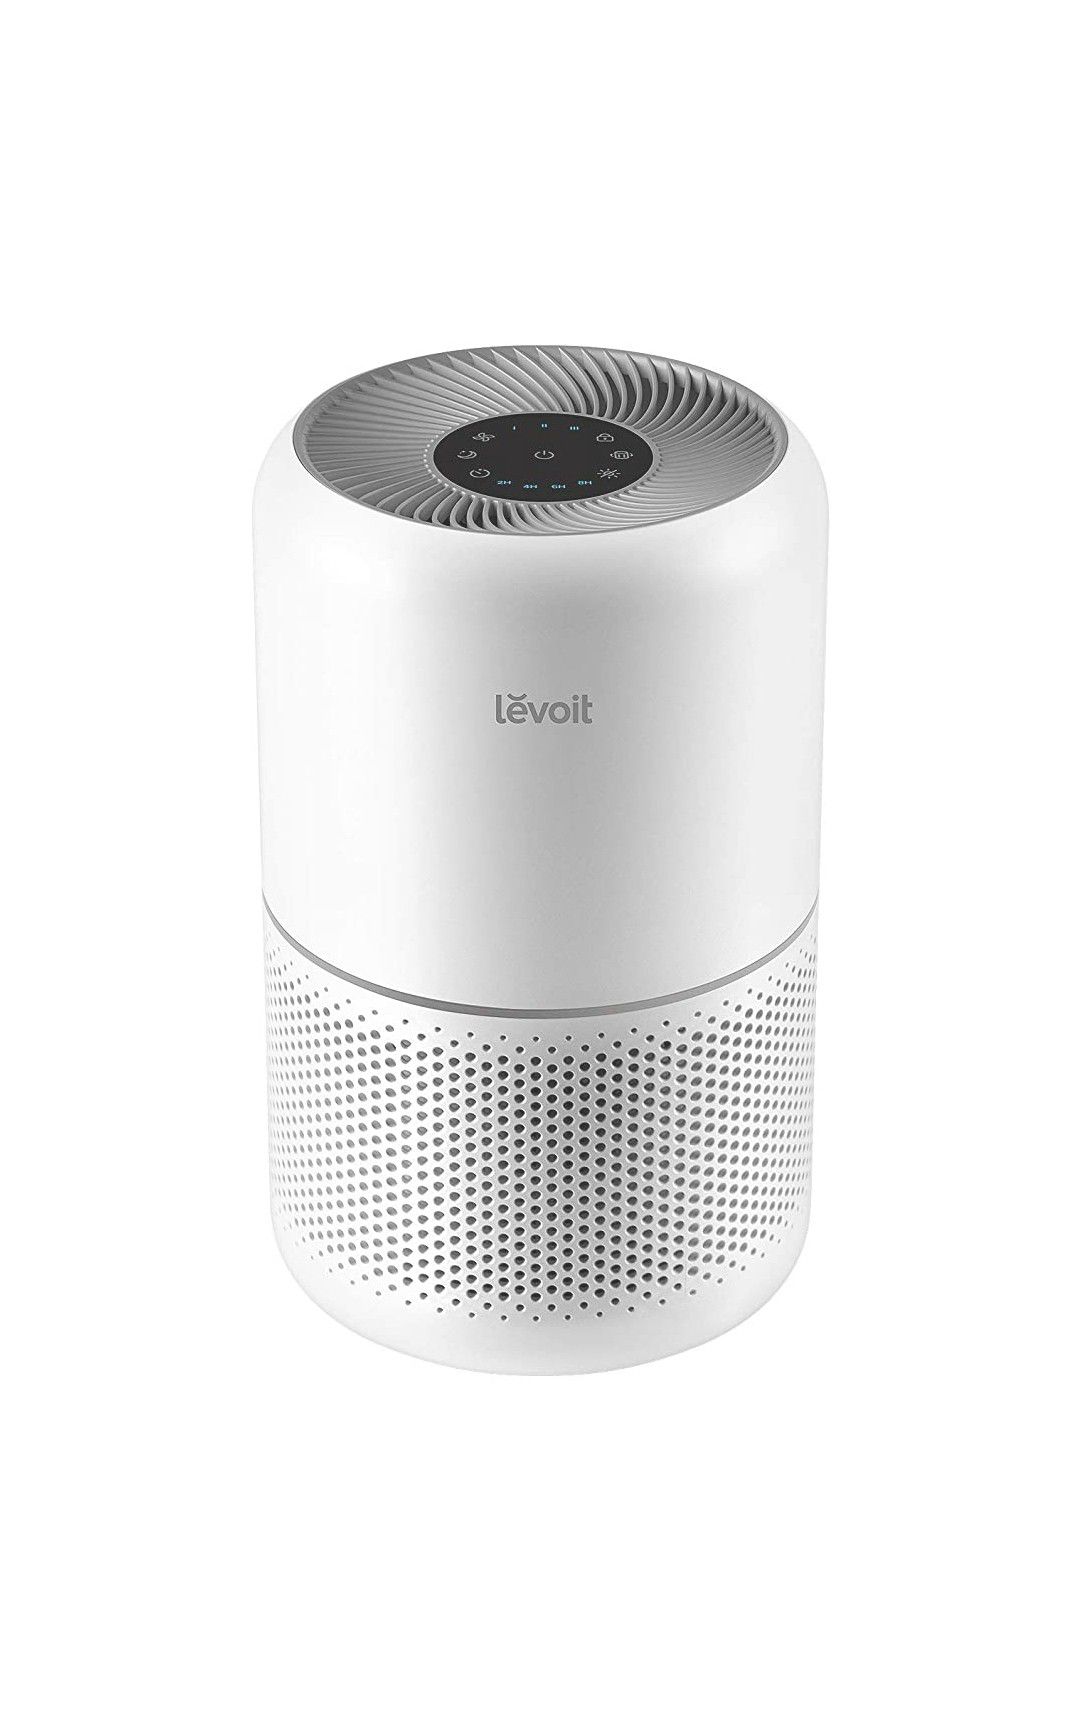 LEVOIT Air Purifier for Home Allergies Pets Hair Smokers in Bedroom, H13 True HEPA Air Purifiers Filter, 24db Quiet Air Cleaner, Remove 99.97%